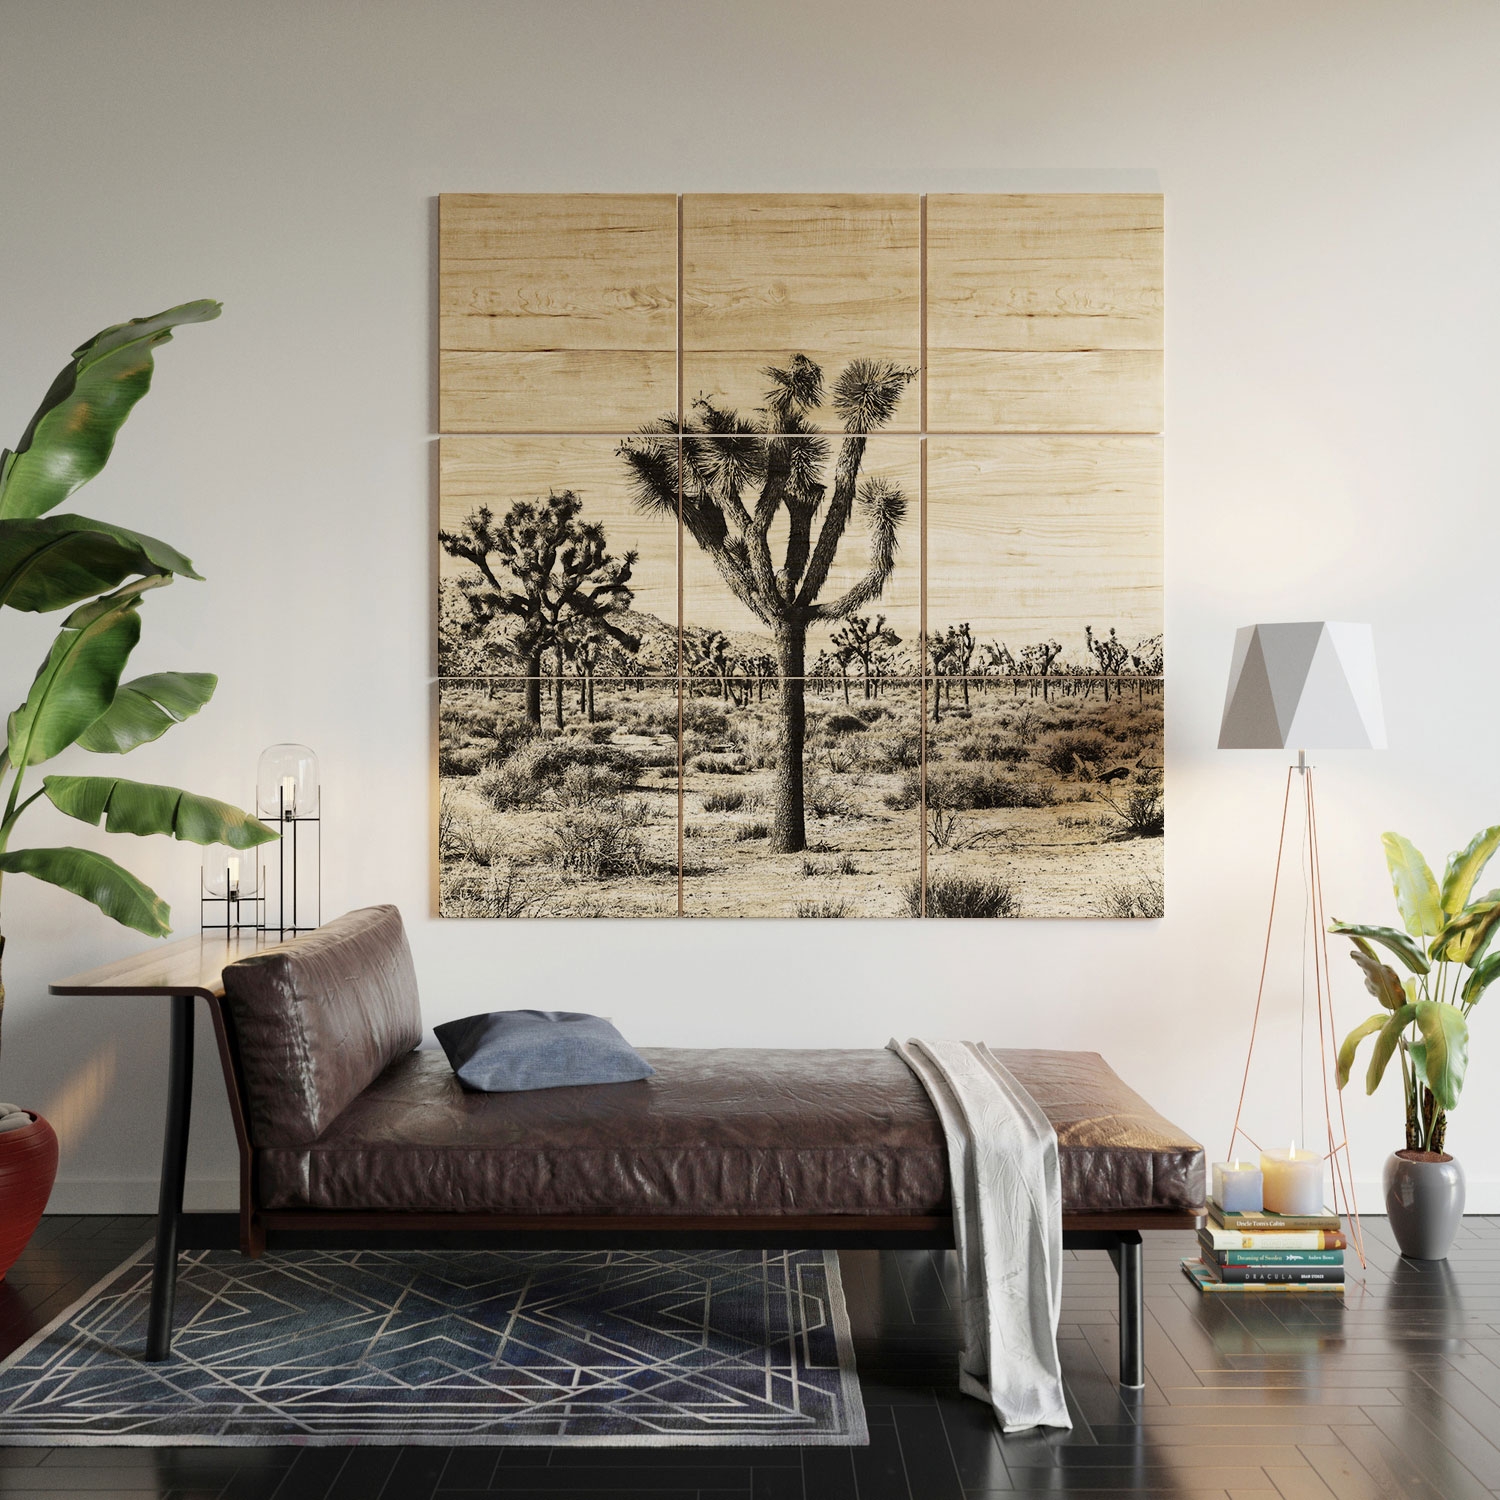 Joshua Trees by Bree Madden - Wood Wall Mural3' X 3' (Nine 12" Wood Squares) - Image 4